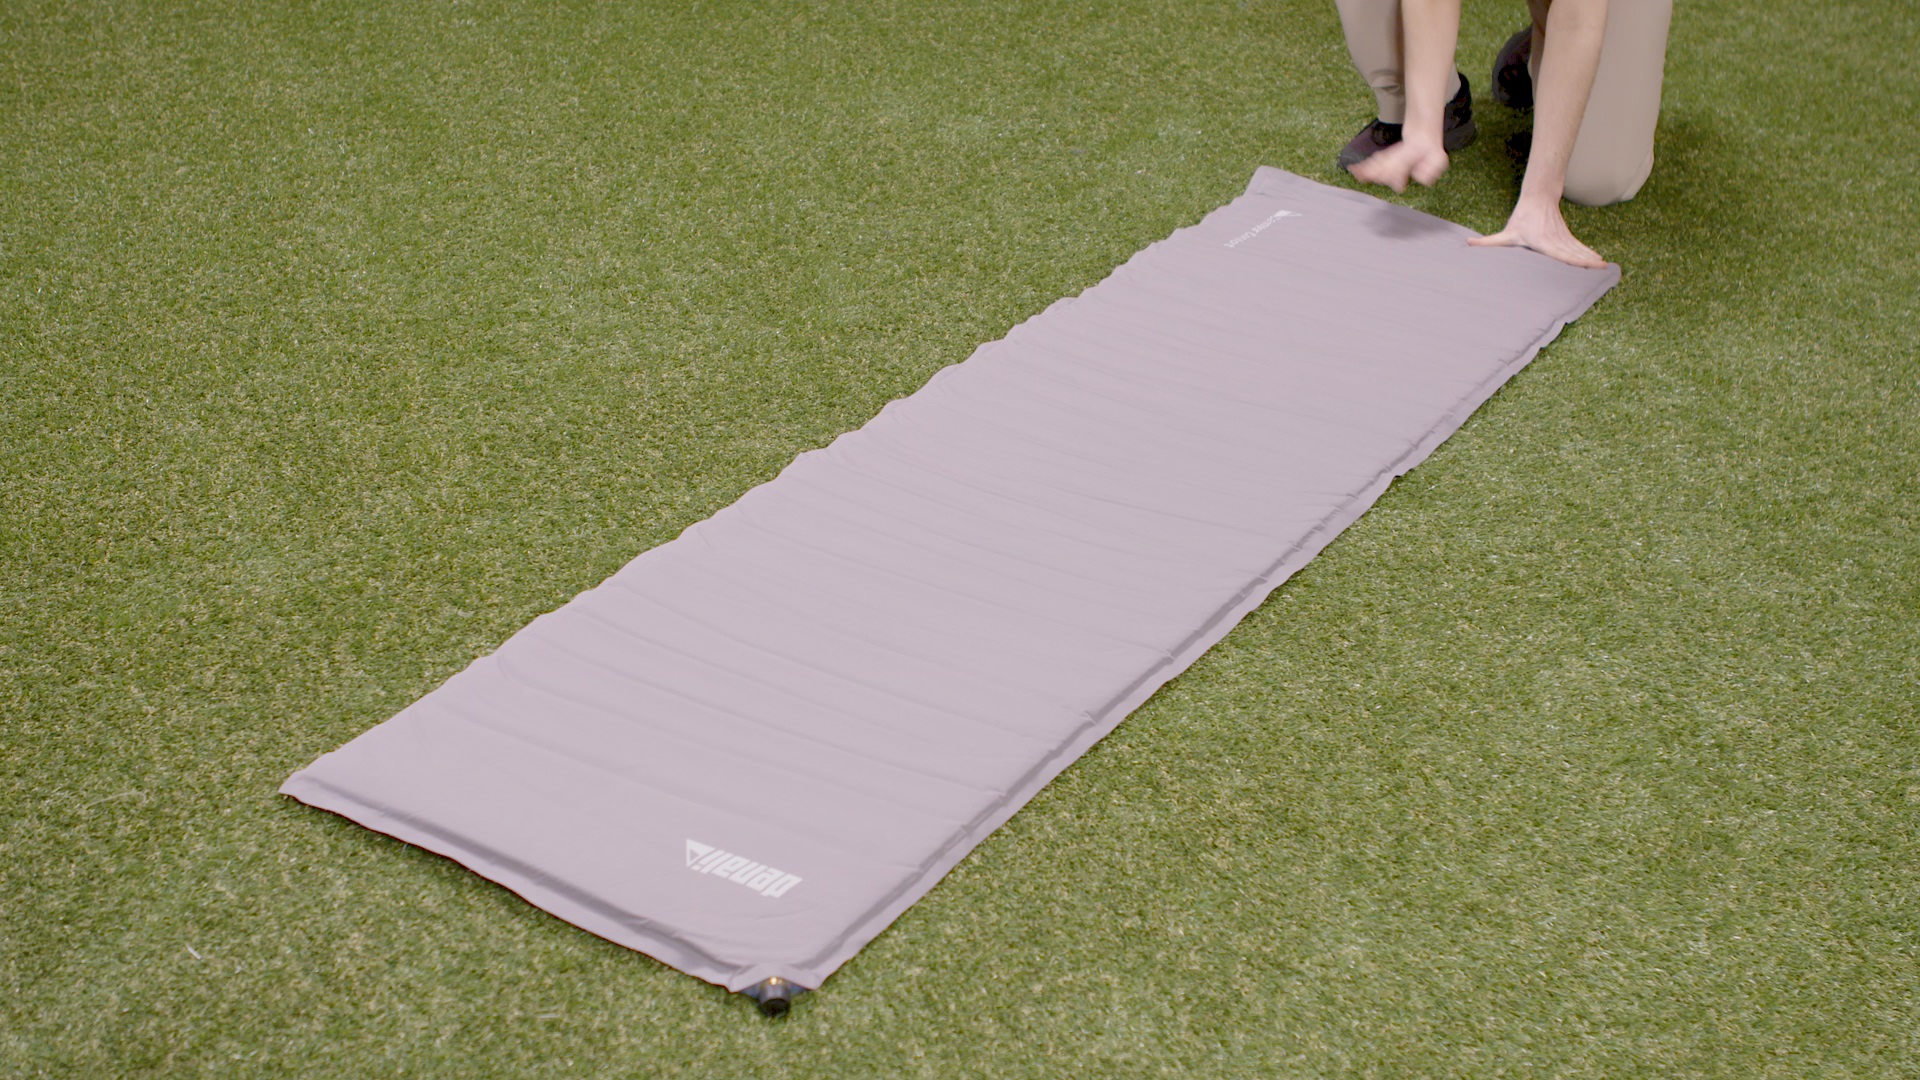 How To Choose A Camping Bed - Mattress